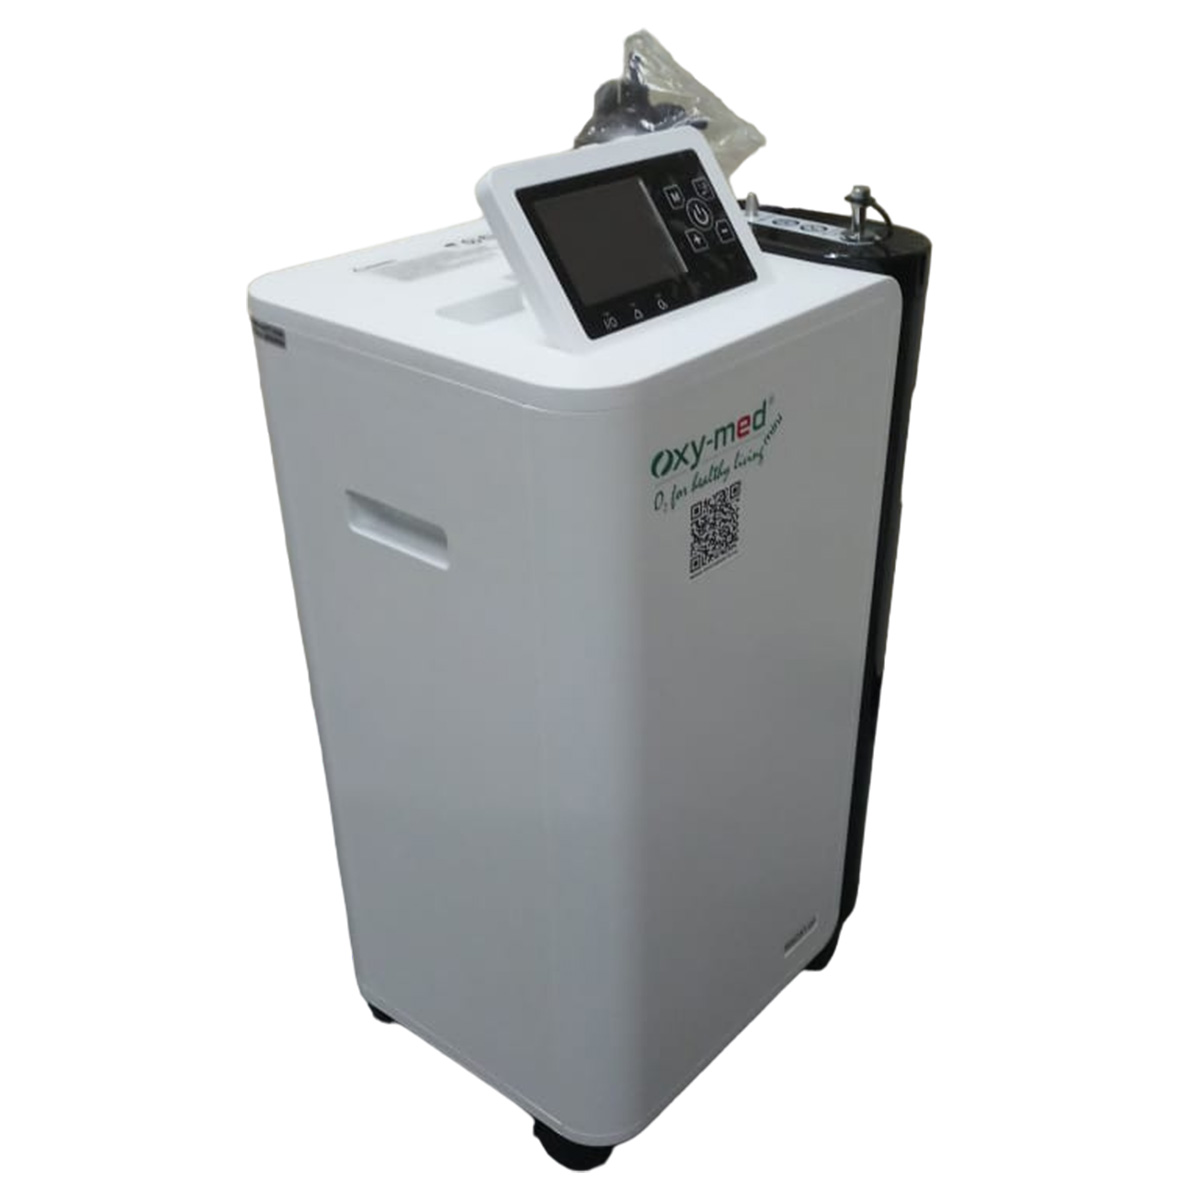 5 Lpm Oxymed Oxygen Concentrator On Sale Suppliers, Service Provider in Chawri bazar